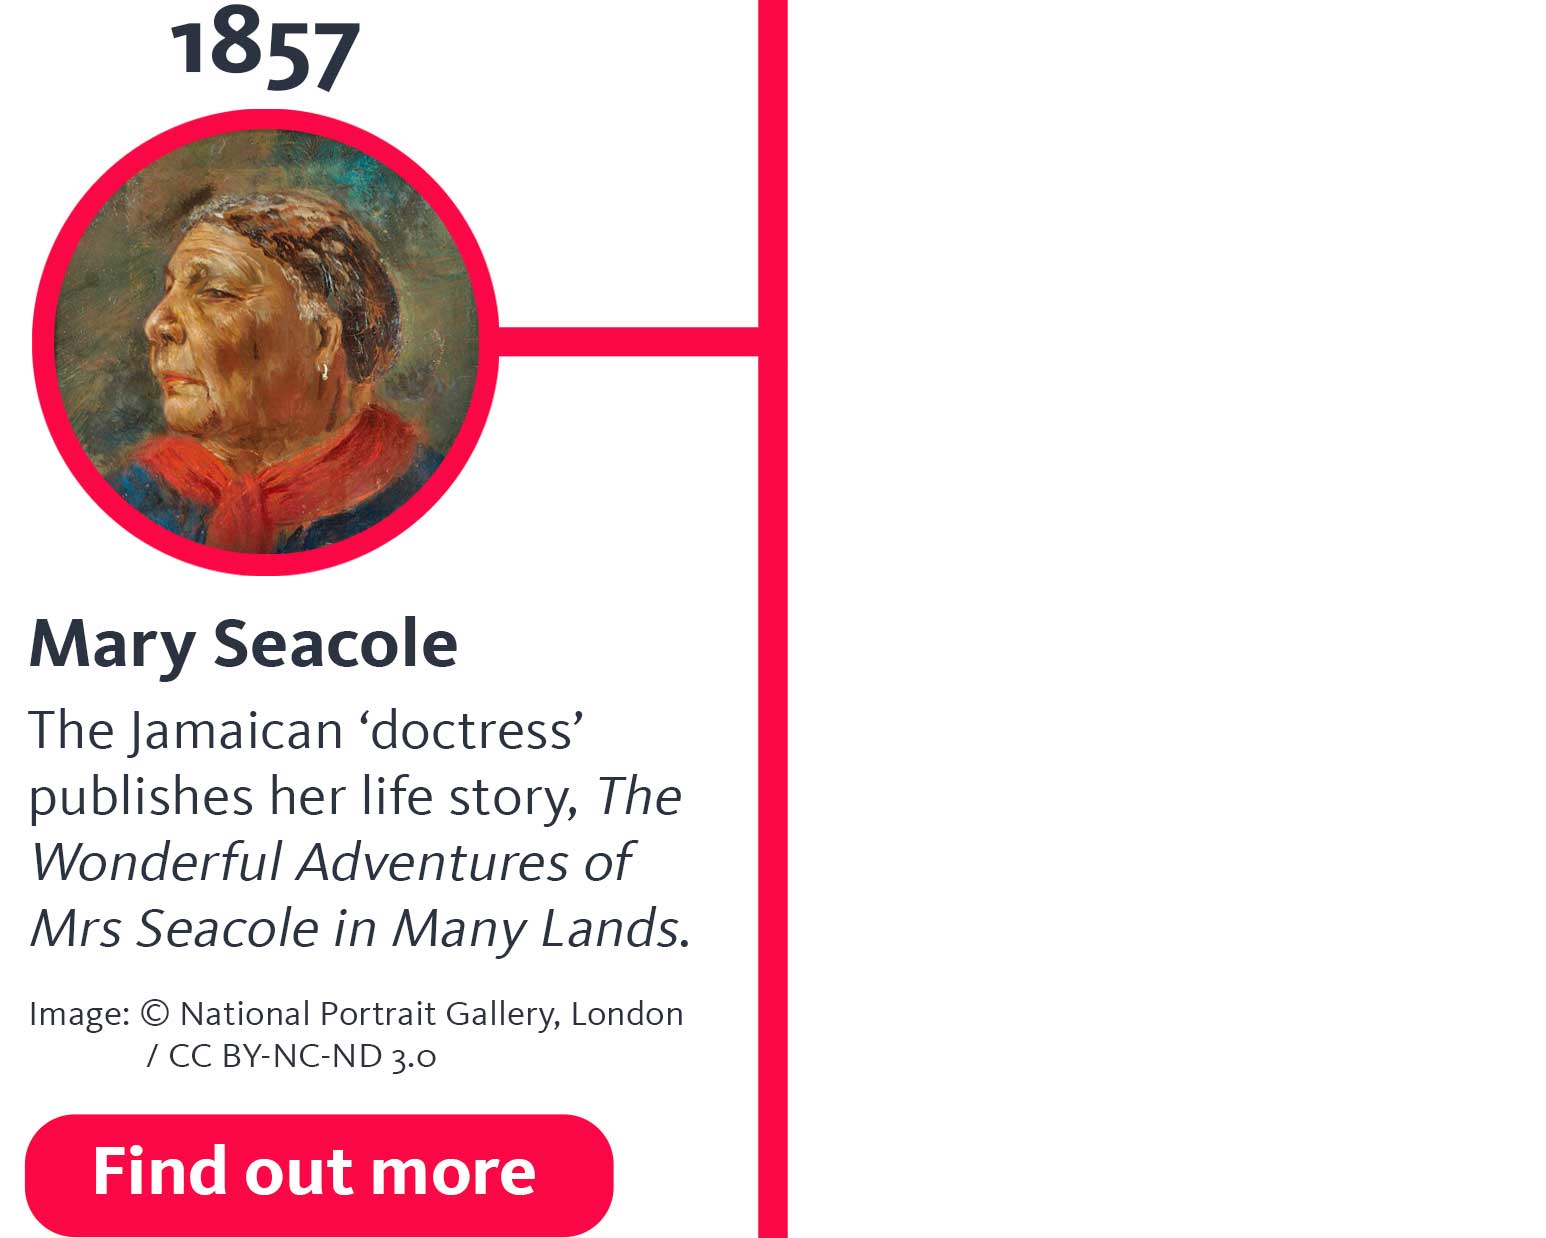 Mary Seacole was born Mary Jane Grant in Kingston, Jamaica, in 1805. She was the daughter of an army officer from Scotland and a Creole woman who ran a hotel called Blundell Hall. Her mother's hotel was popular with officers and it was there that Mary's lifelong relationship with the British Army began